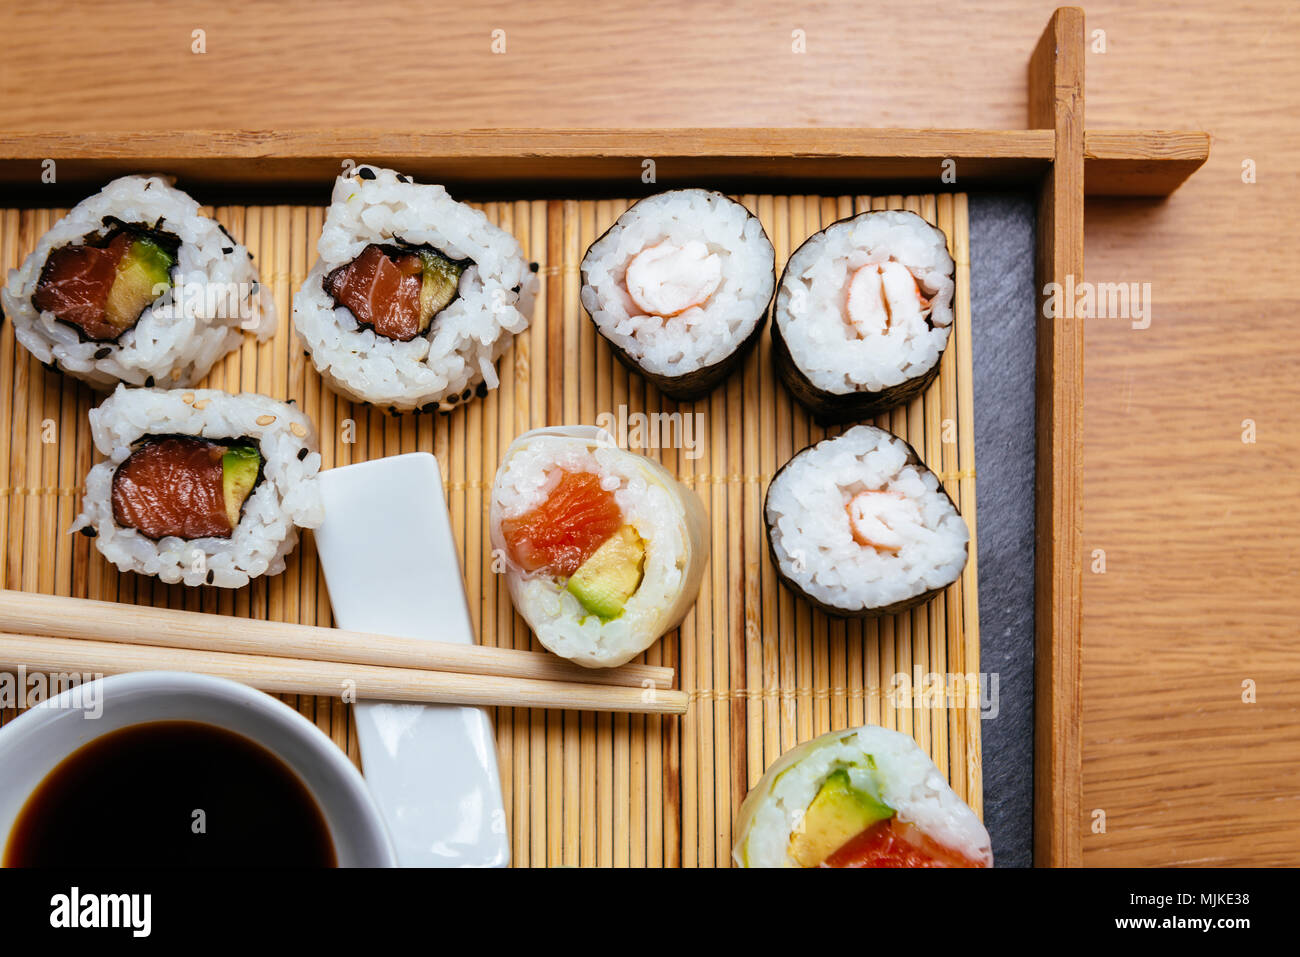 Sushi food prepared on a wooden mat Stock Photo